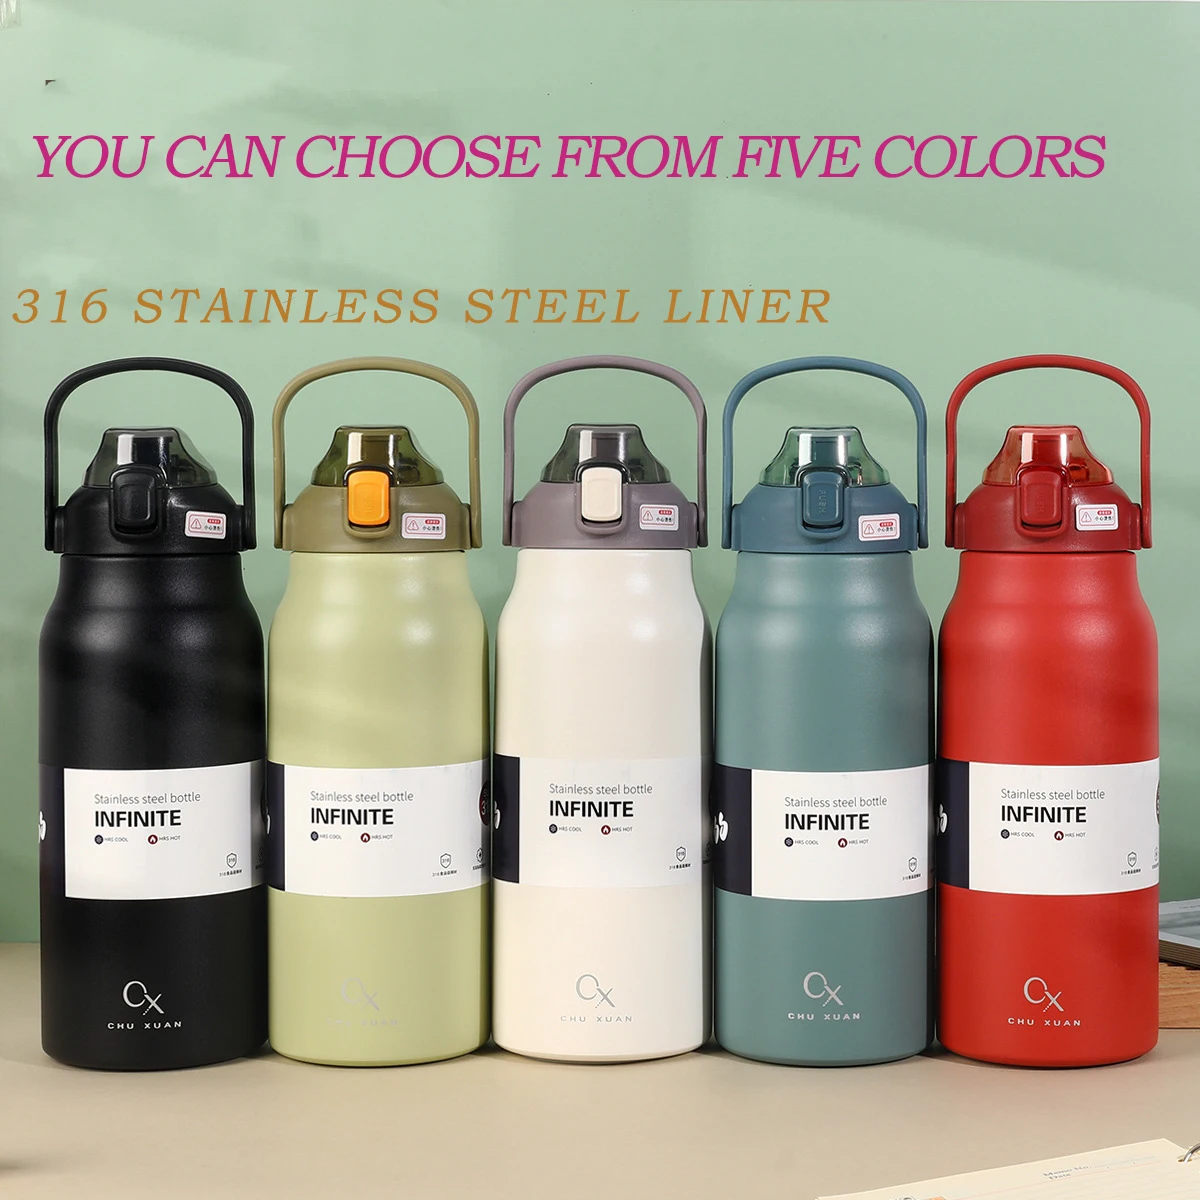 https://ae01.alicdn.com/kf/Saaae9b0d683d41ed8eaca7a5a34e2c85D/Tumbler-Thermo-Bottle-Large-Capacity-With-Straw-Stainless-Steel-Thermal-Water-Bottle-Cold-and-Hot-Thermos.jpg